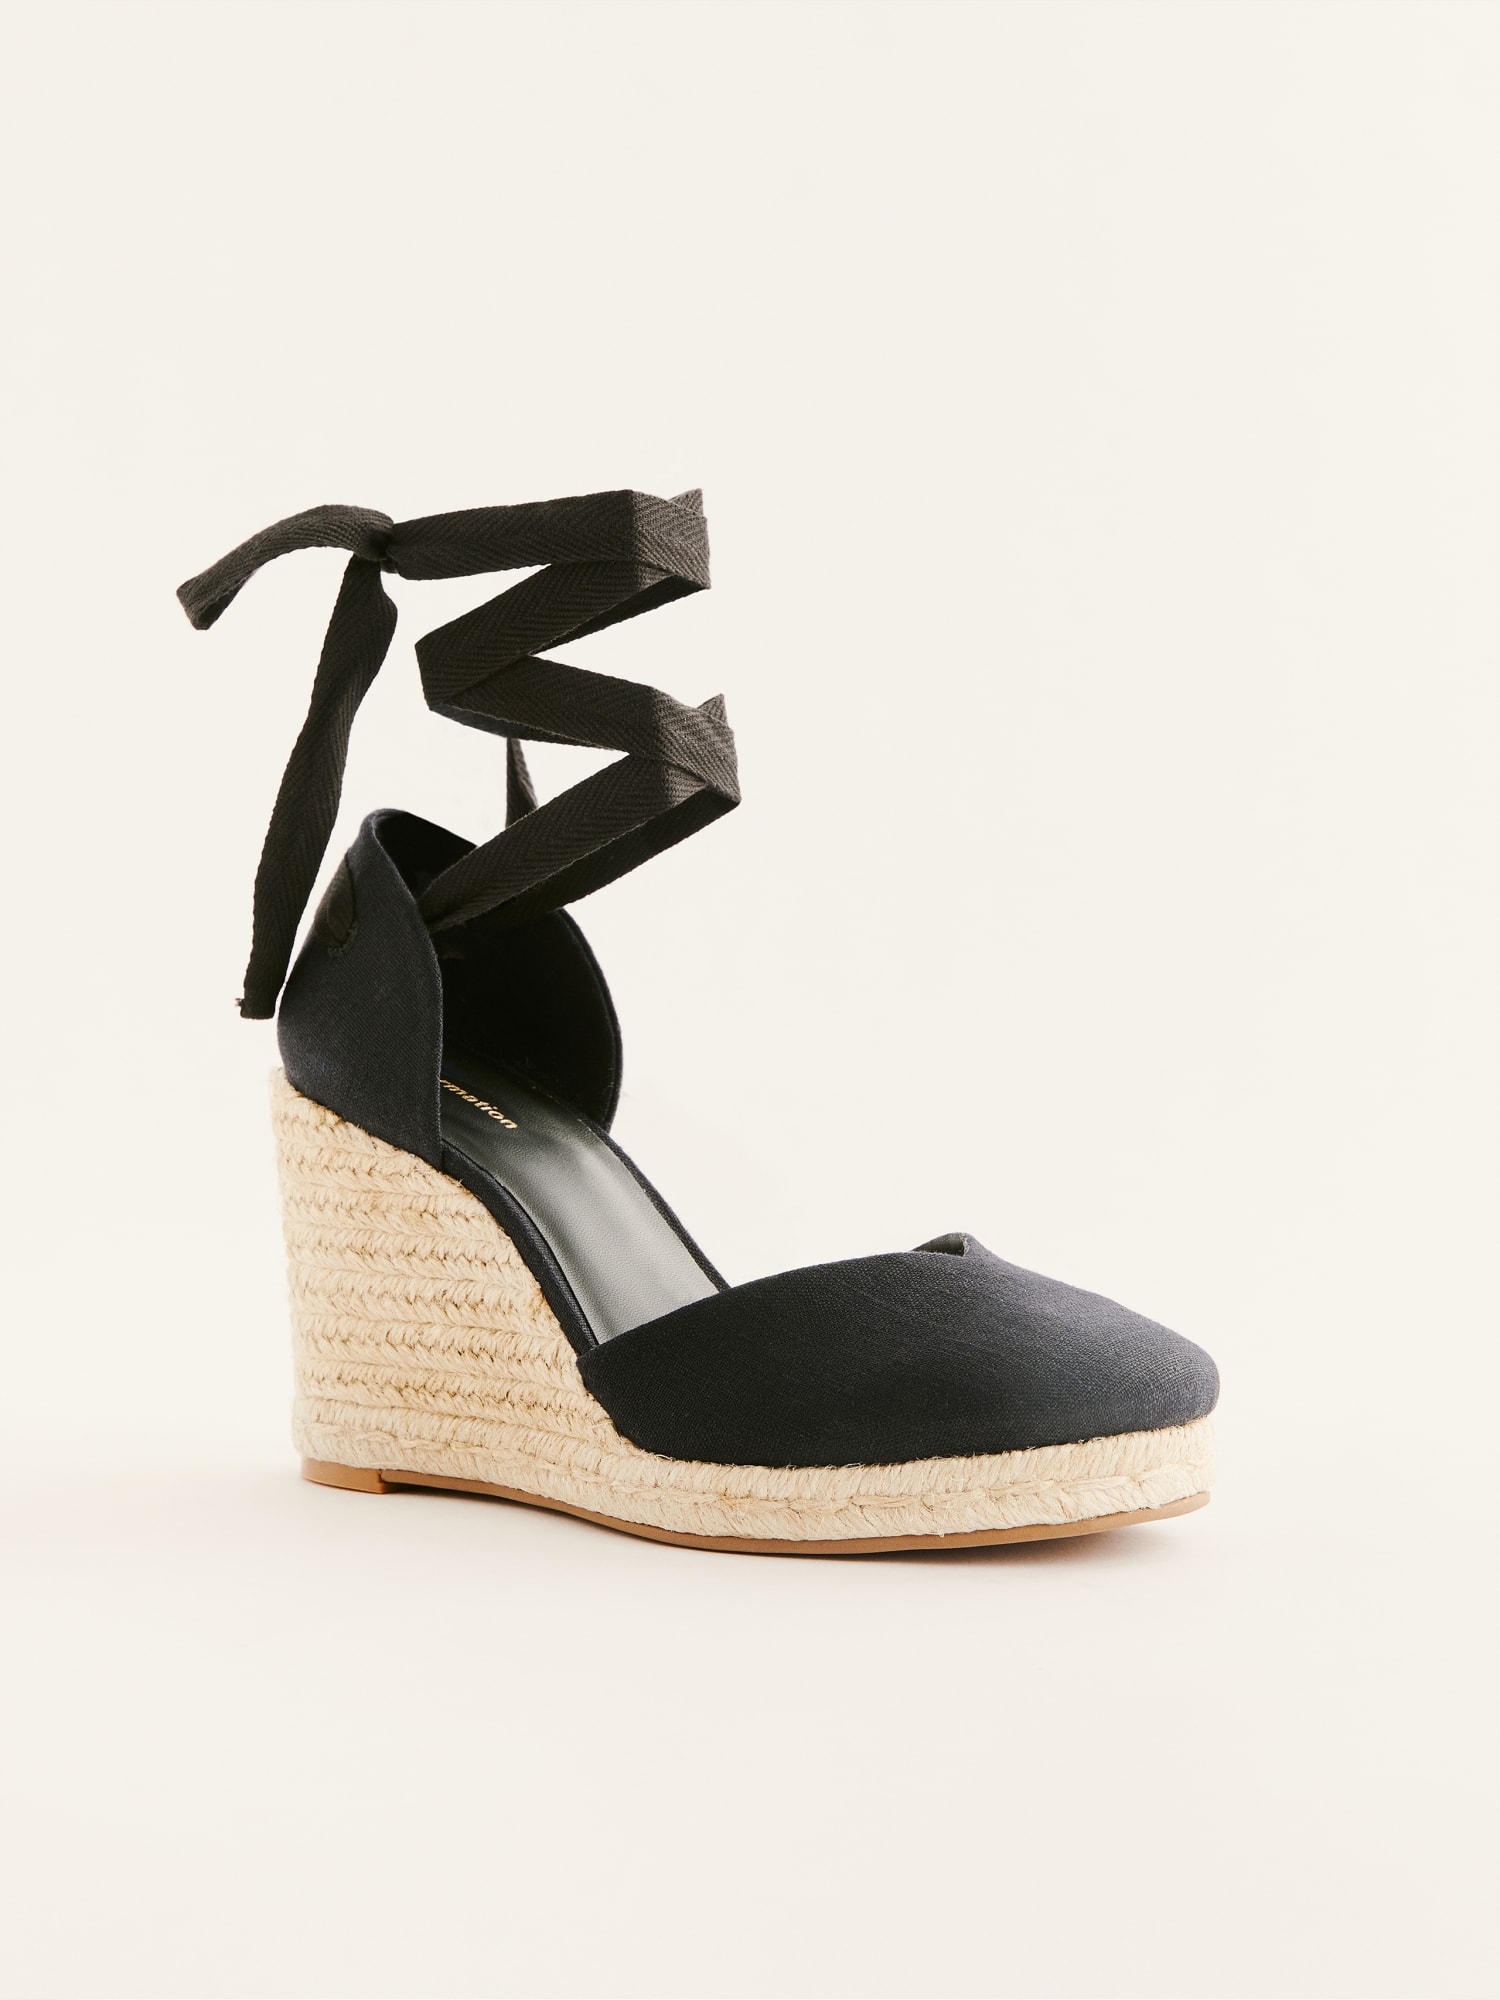 Camilla Lace Up Wedge Espadrille - Sustainable Shoes